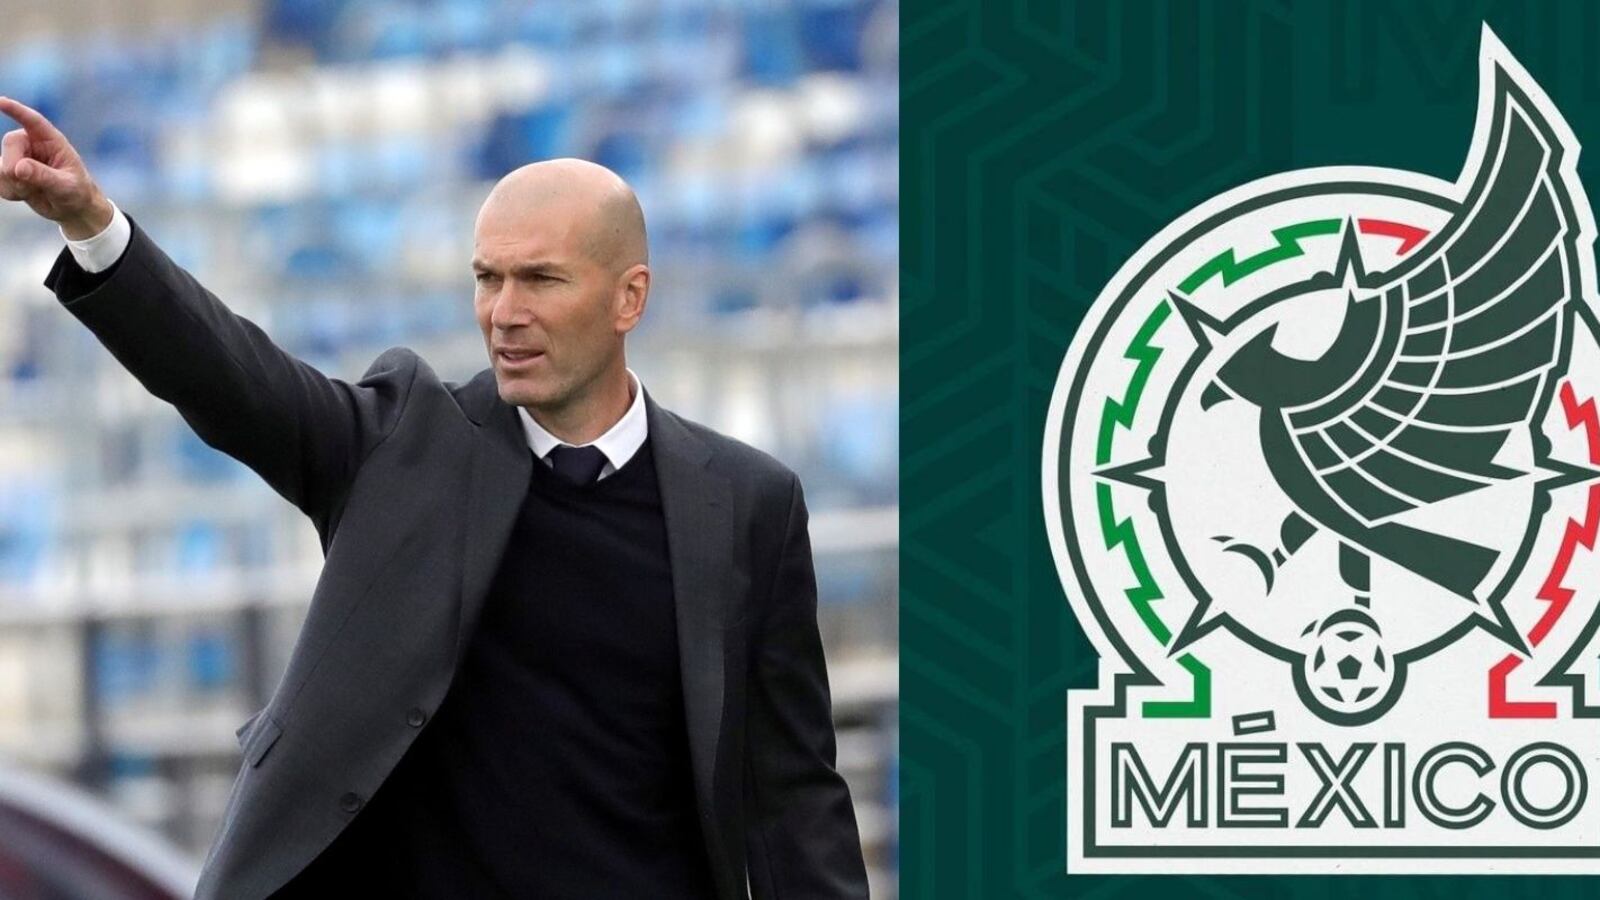 Welcome to Mexico Zidane, the decision to work with the FMF that paralyzes the world